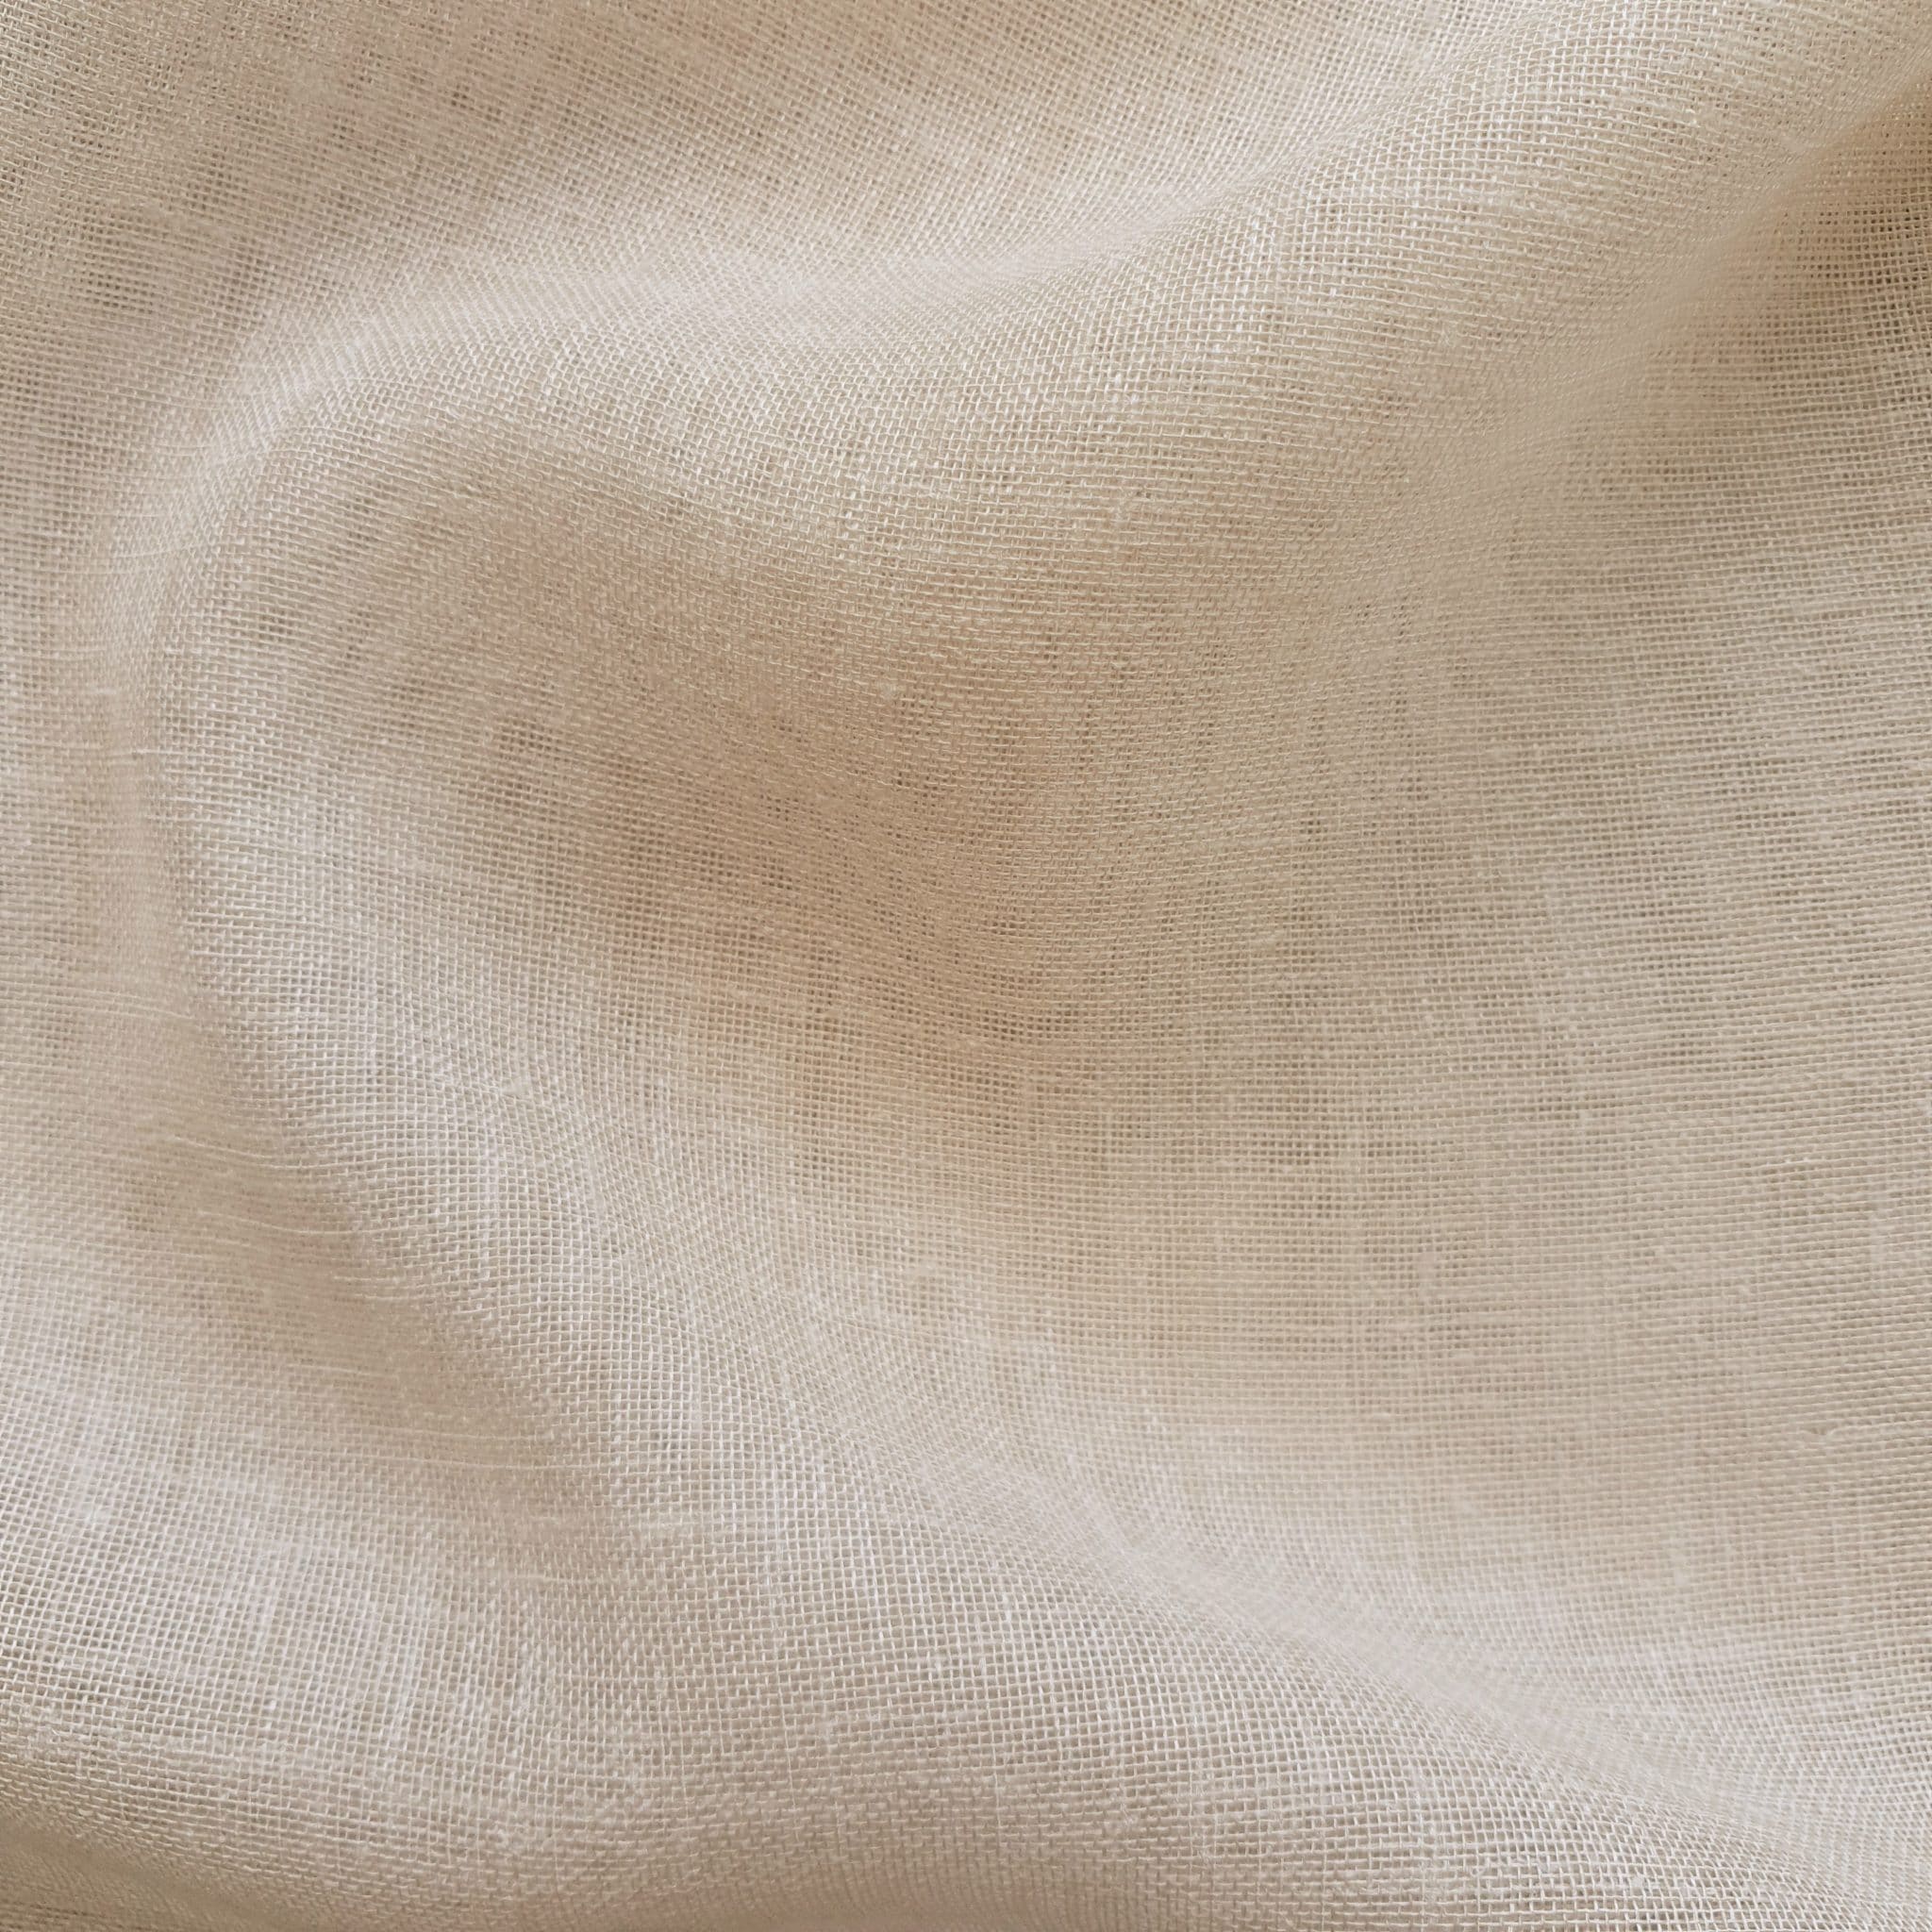 Ardeche Acre FR Voile - Off White Sandy Voile - 3m Wide - Contract Fabric